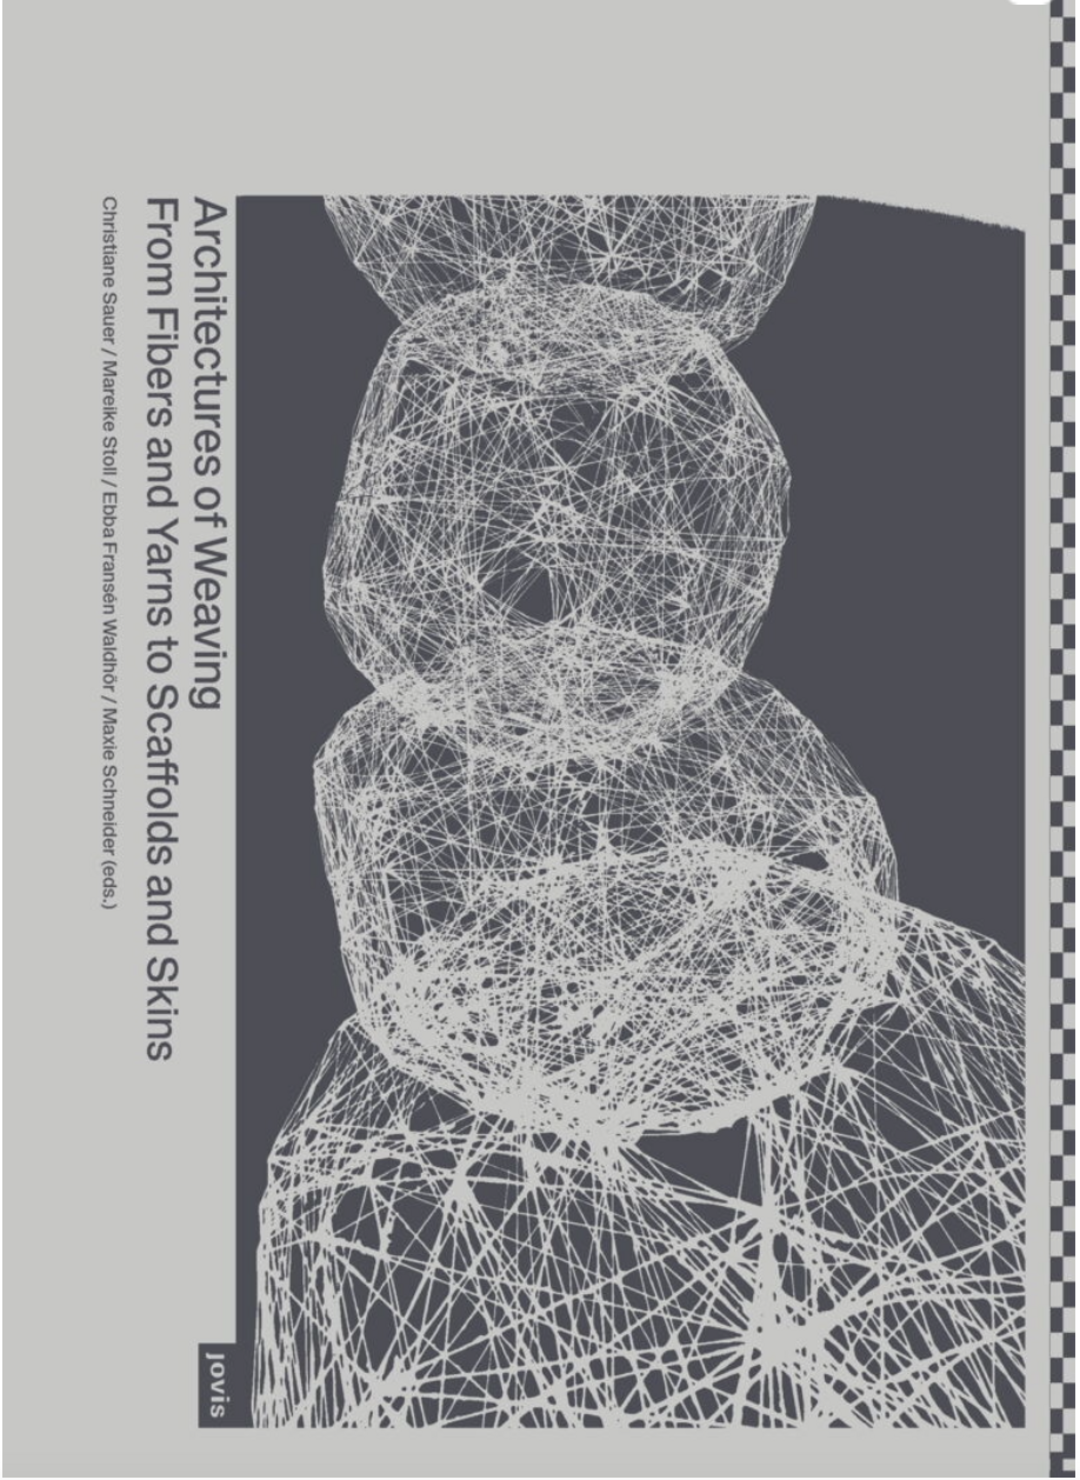 Cover of <em>»</em>Architectures of Weaving«: »Stone Web«. Copyright: weißensee school of art and design berlin / Natascha Unger, Idalene Rapp
